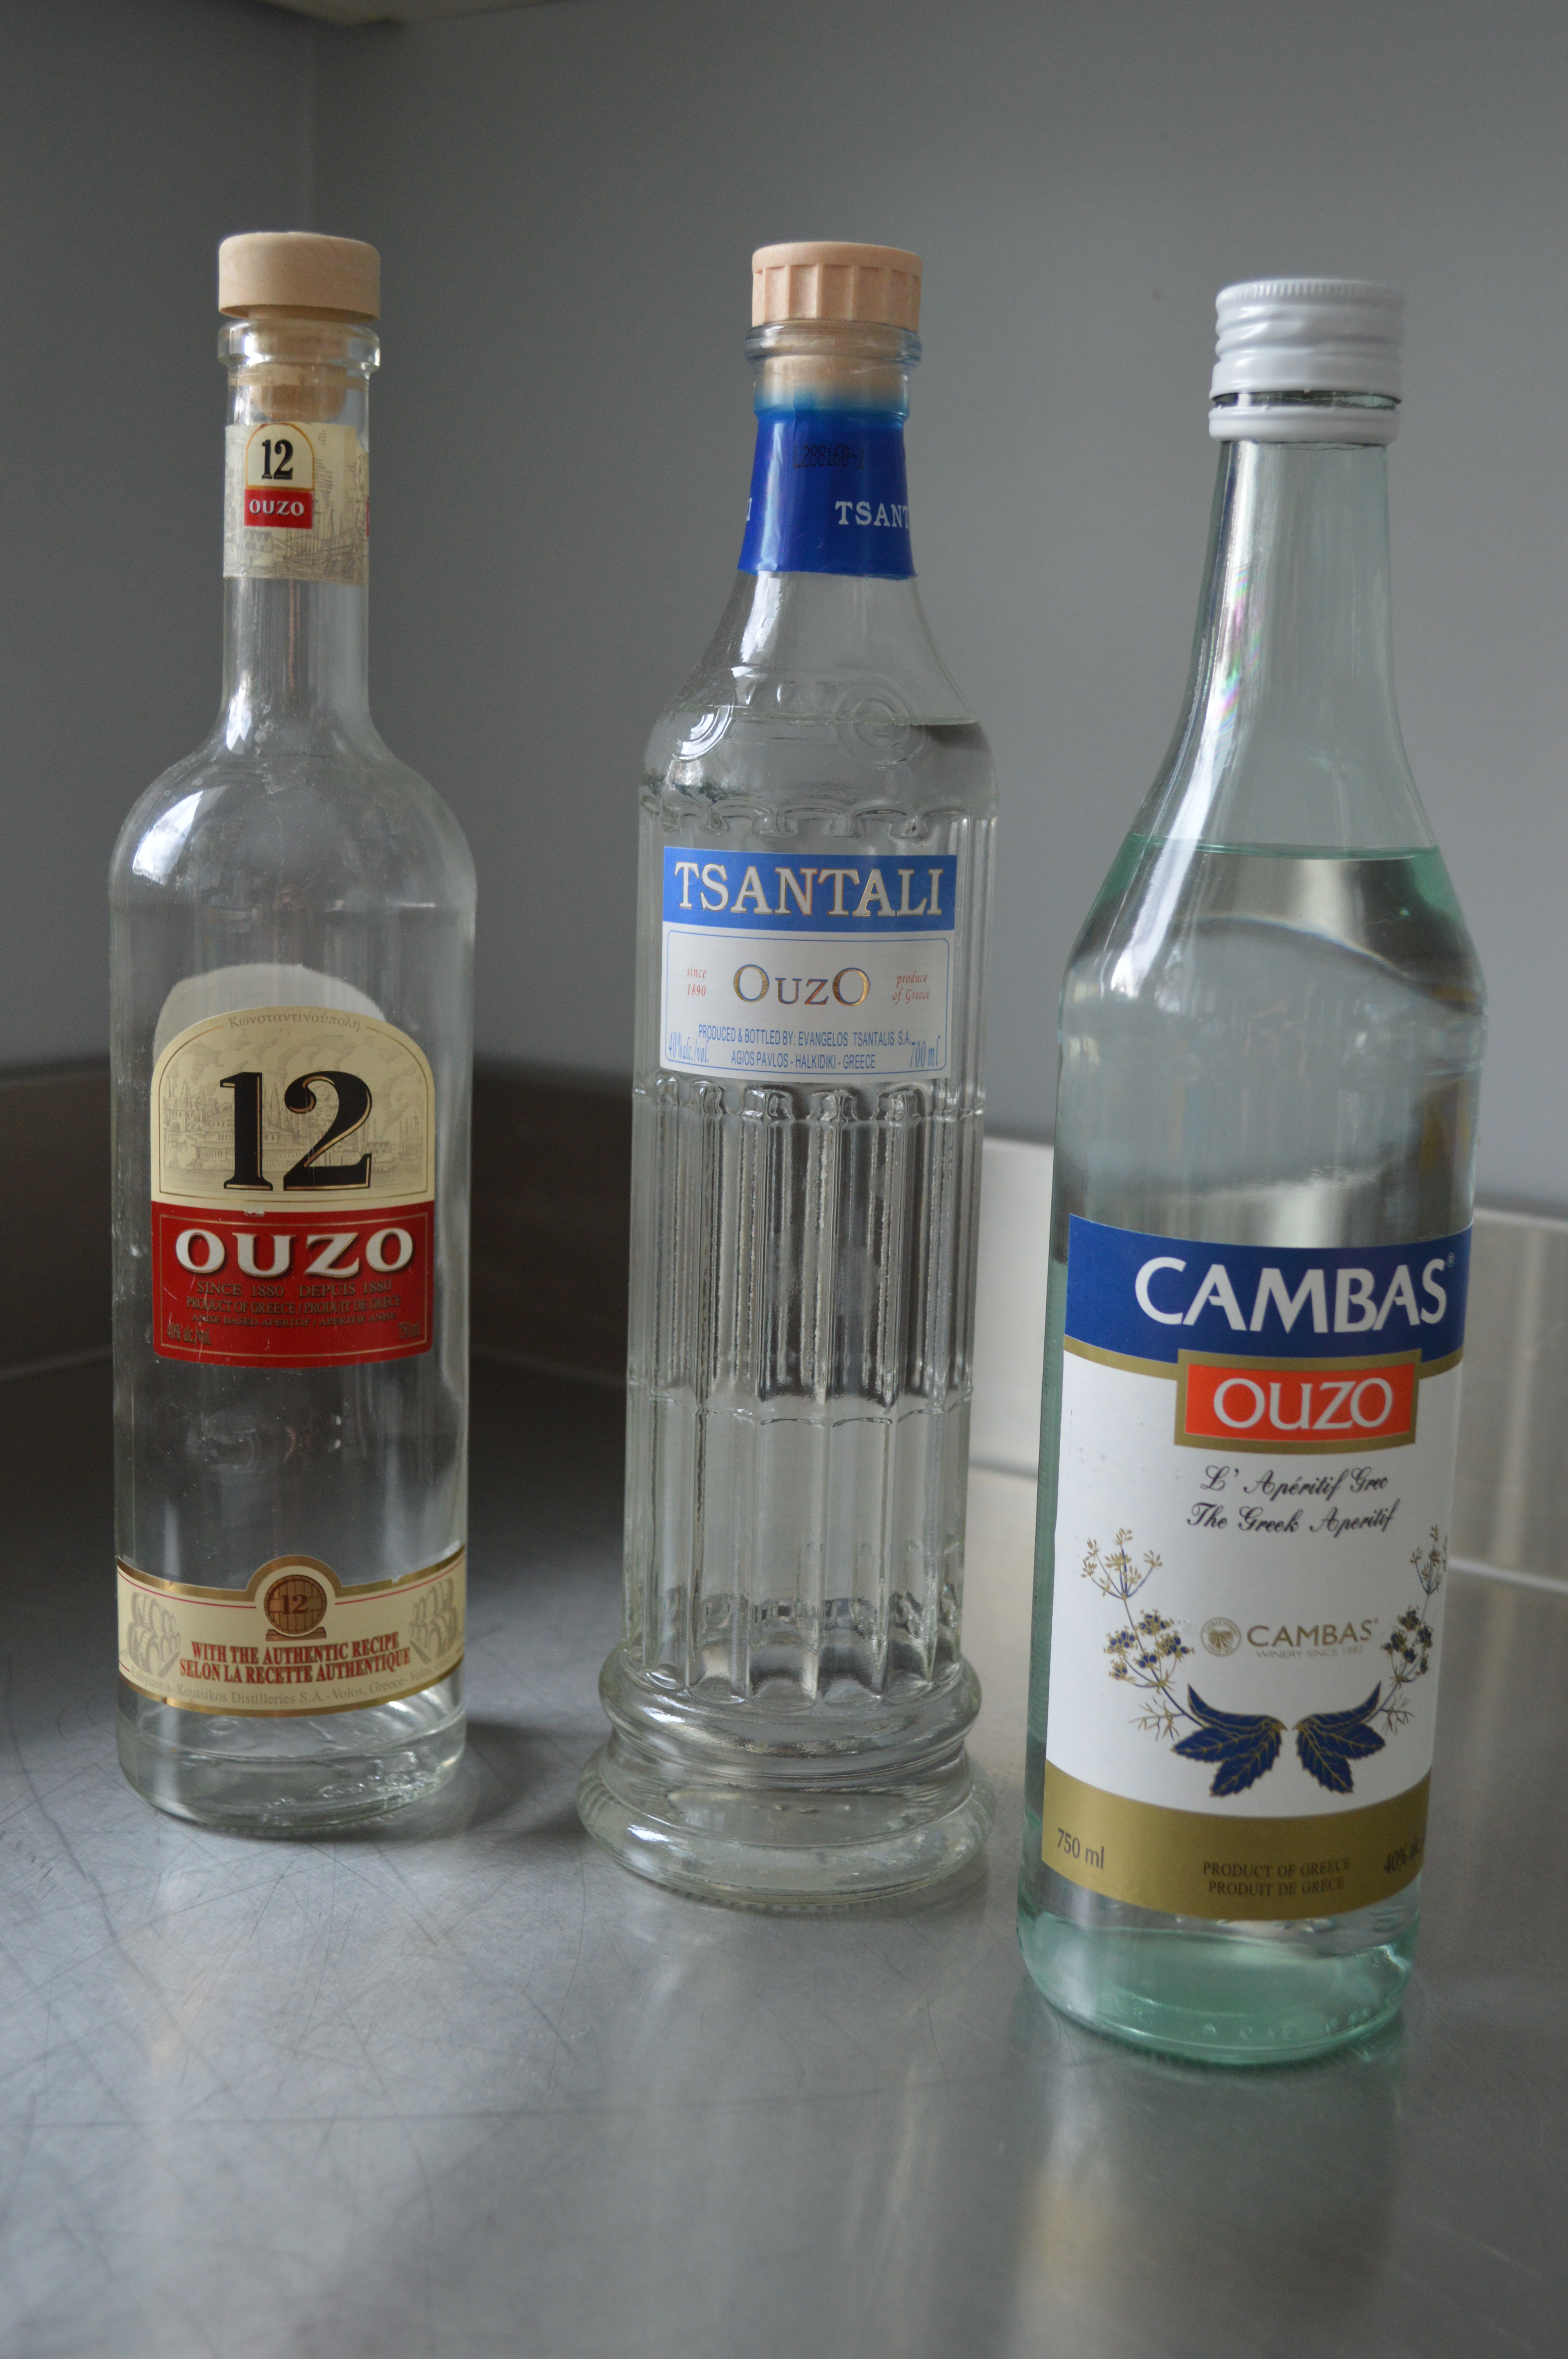 The only three brands of ouzo currently available in Alberta: Ouzo 12, Cambias, and Olympic Ouzo by Tsantali.